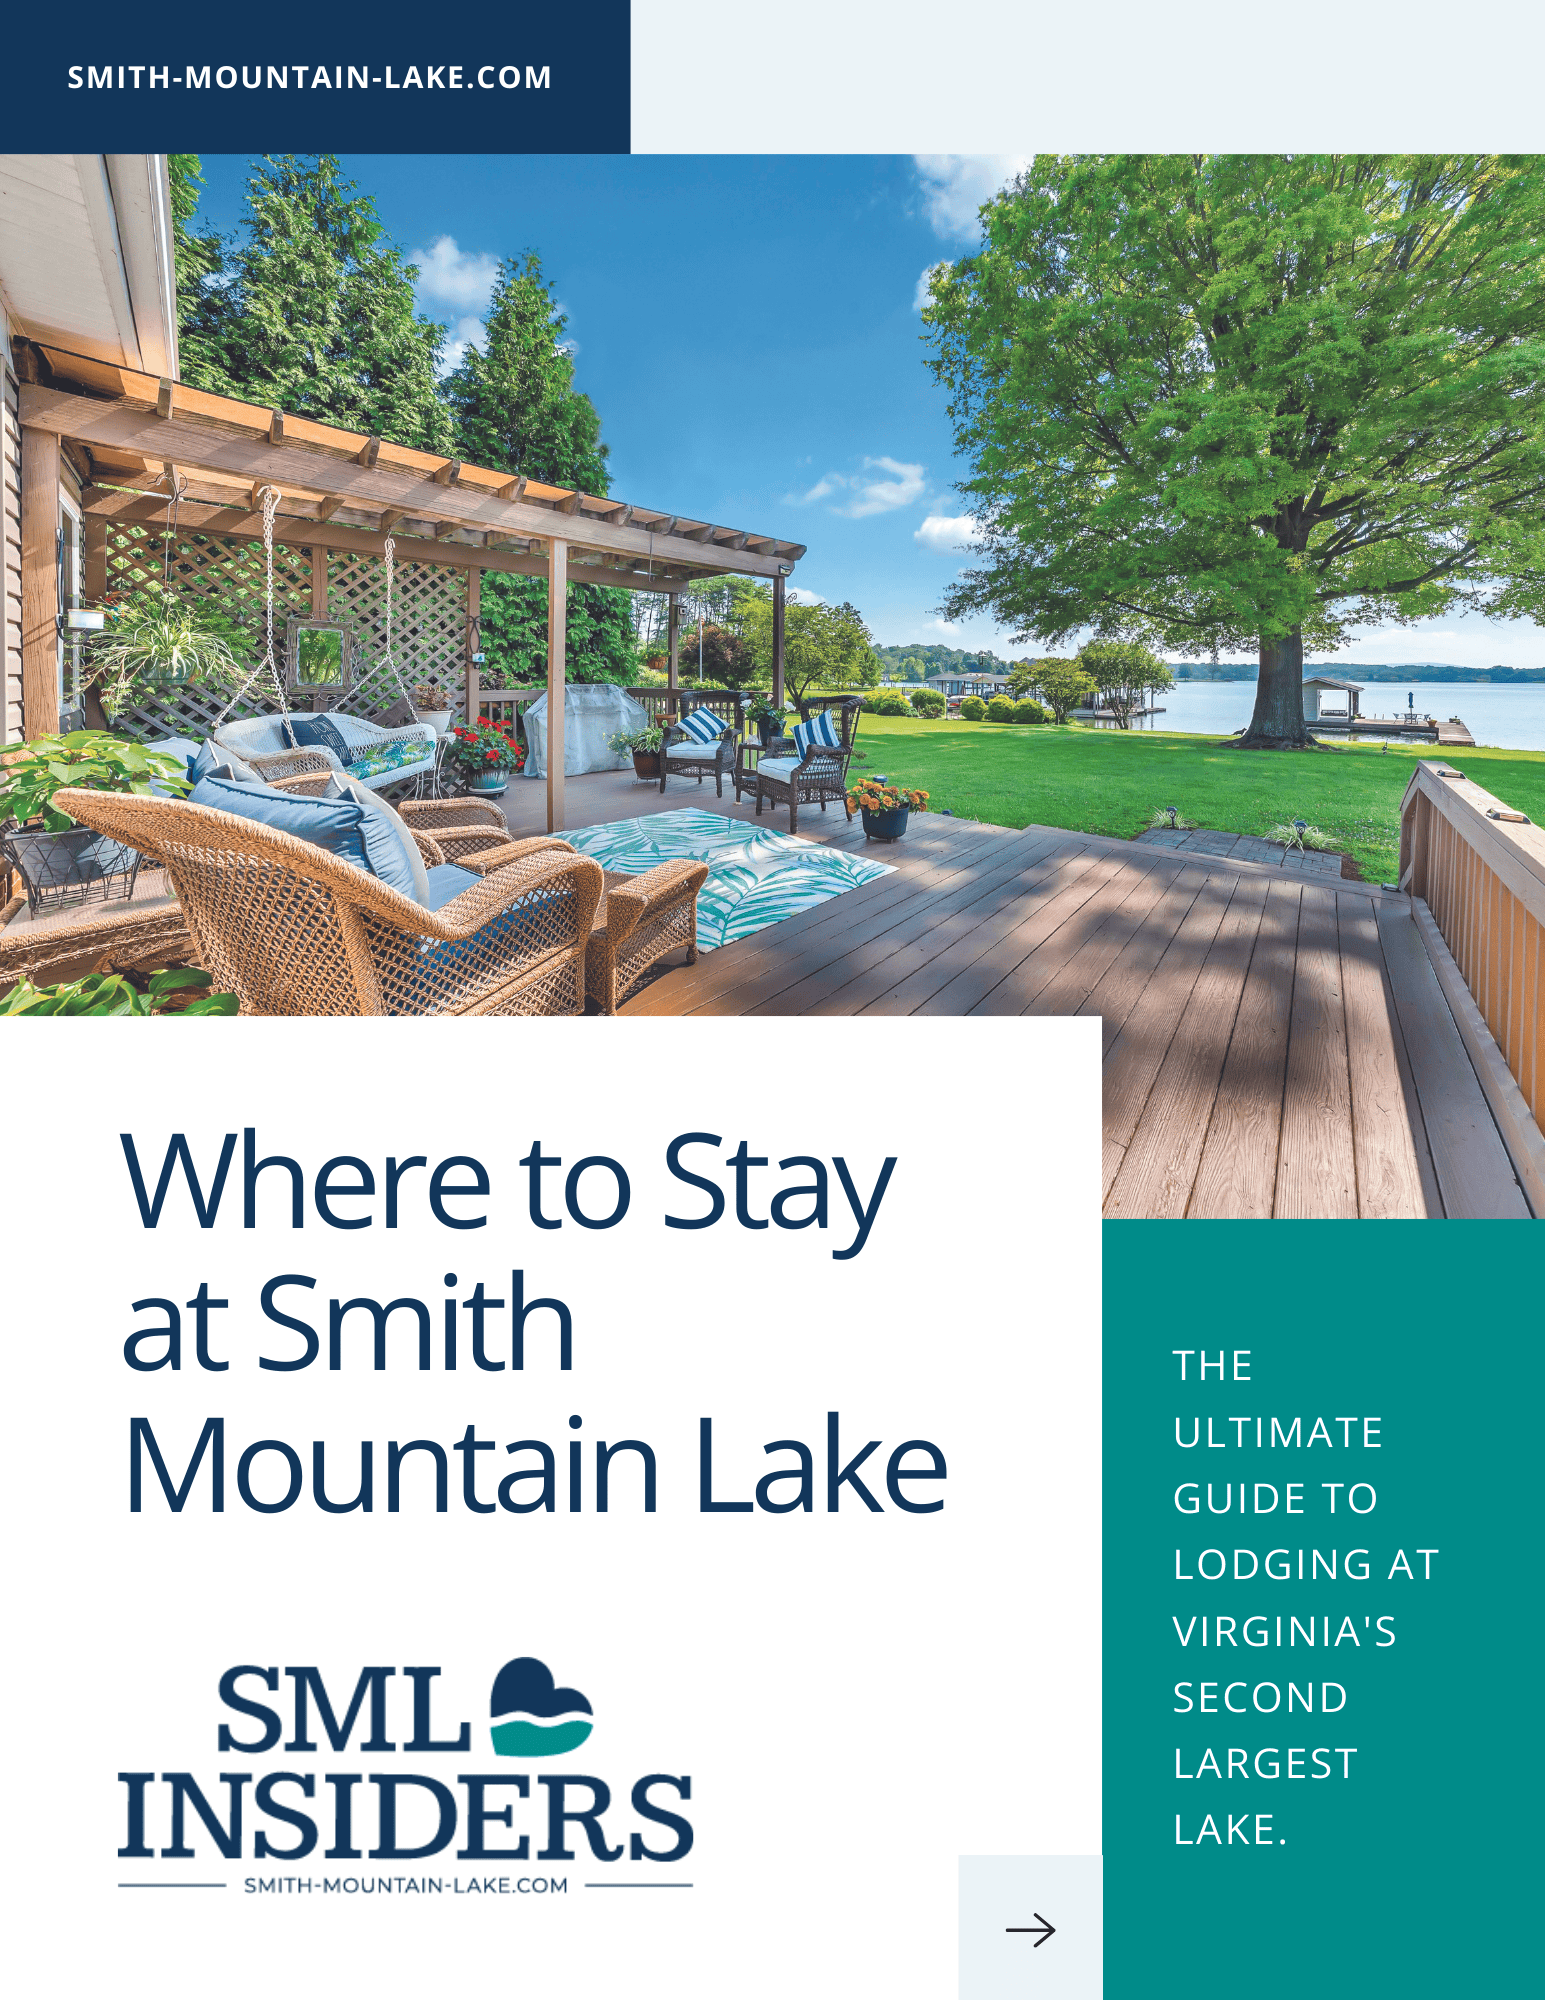 Cover of SML Lodging Guide with beautiful view of Smith Mountain Lake, VA.
